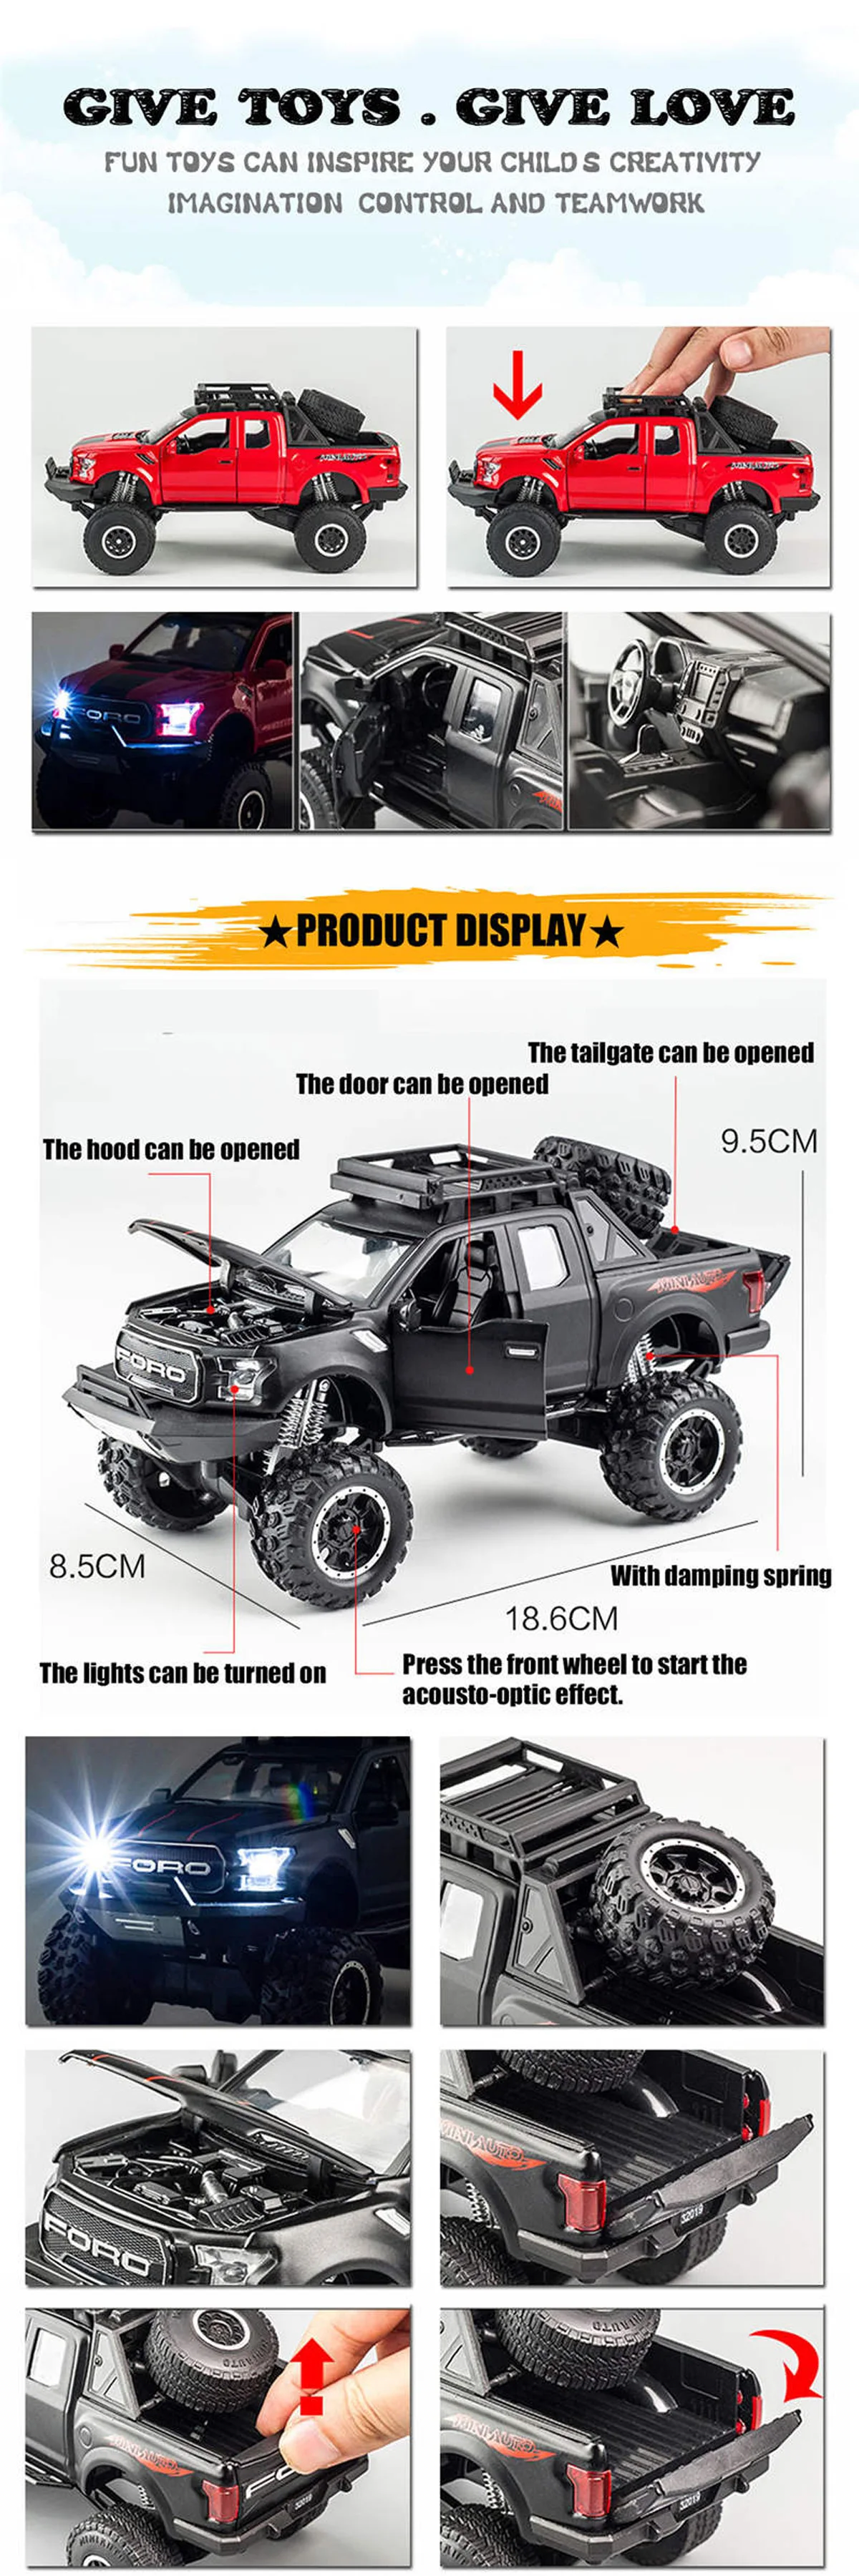 FREE GIFT⭐ Scale 1/32 Raptor F150 Monster Truck Metal Diecast Alloy Cars Model Toy Car For Boys Child  Kids Toys Vehicle Hobbies toy boats